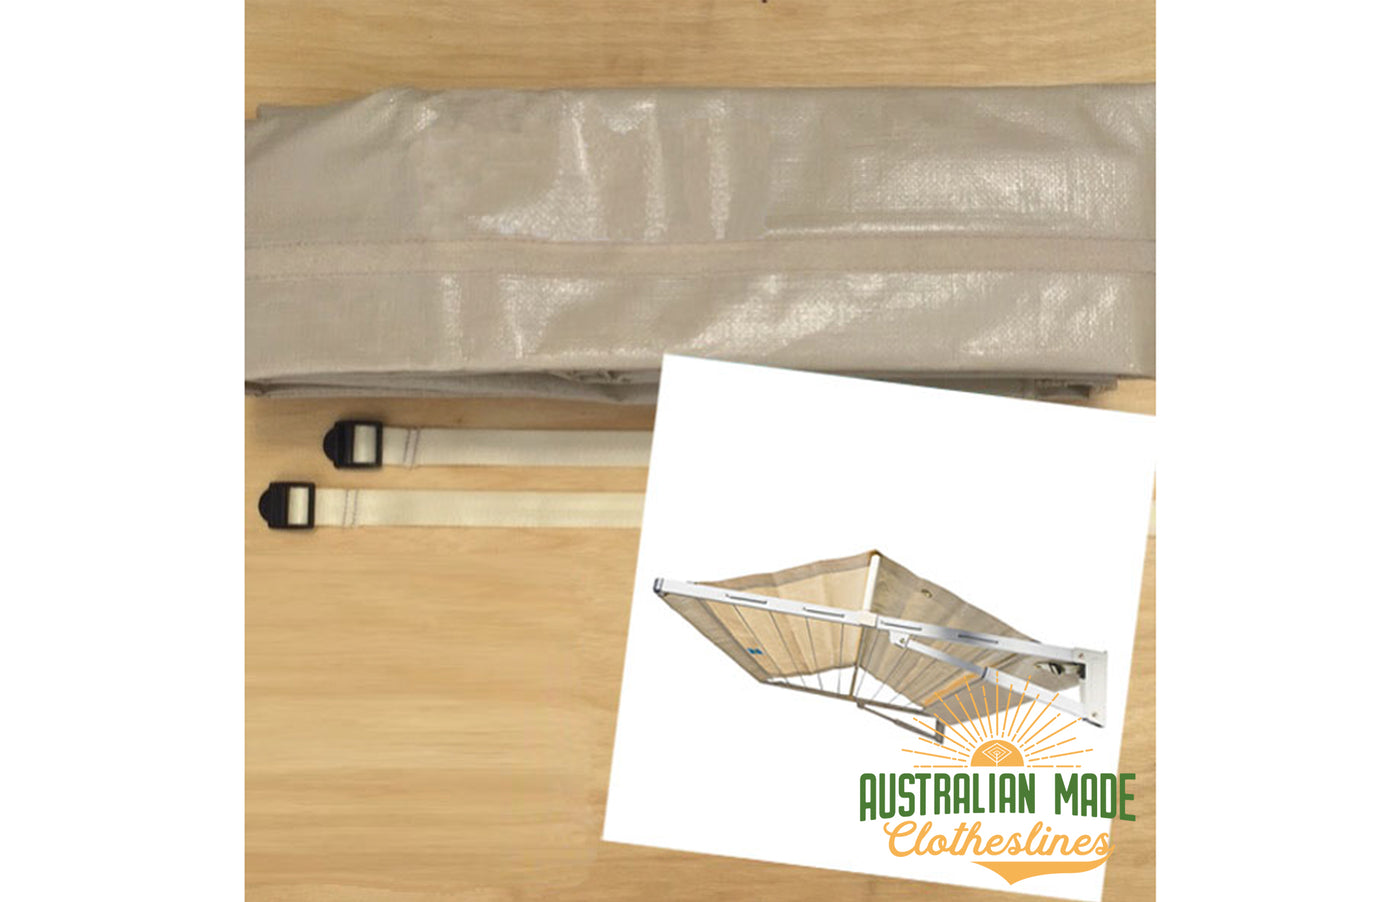 Replacement Folding Frame Clothesline Cover - Australian Made Clotheslines